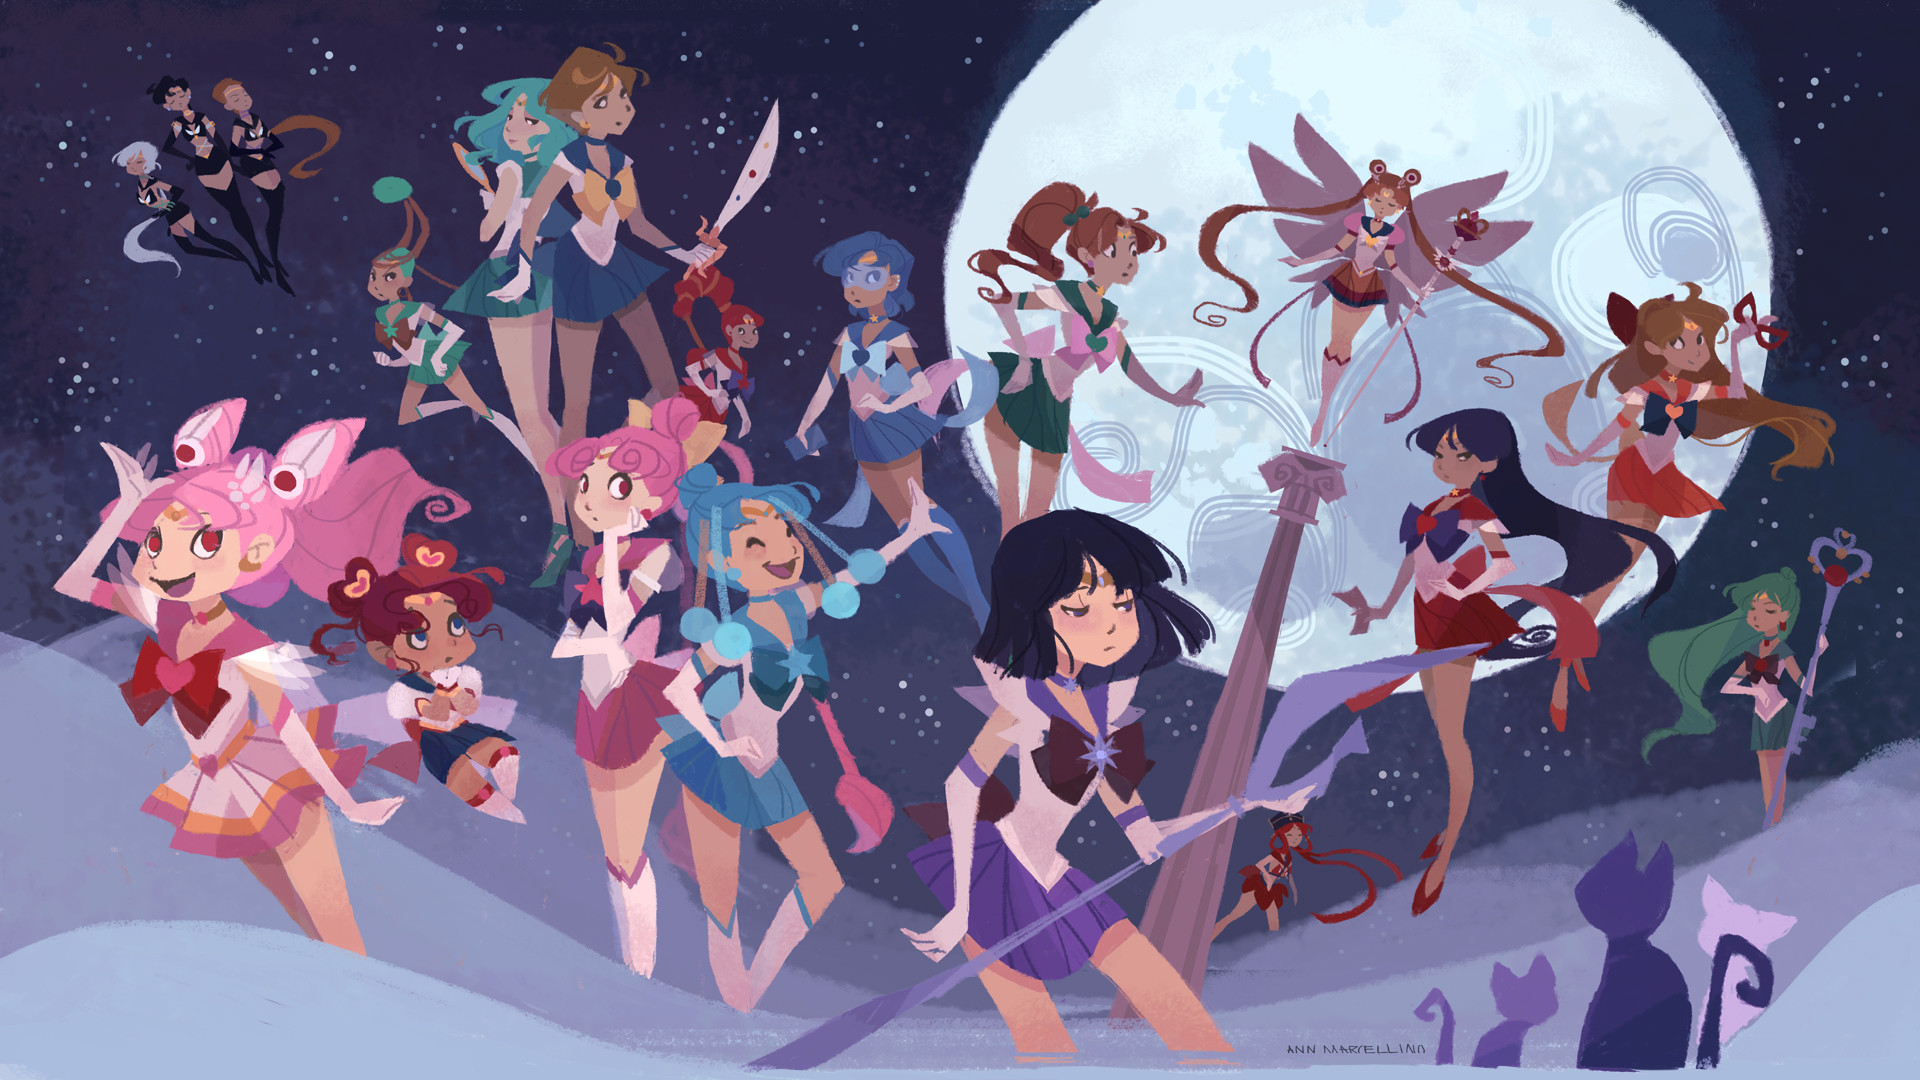 1920x1080 Sailor Soldiers Wallpapers by nna Sailor Soldiers Wallpapers by nna